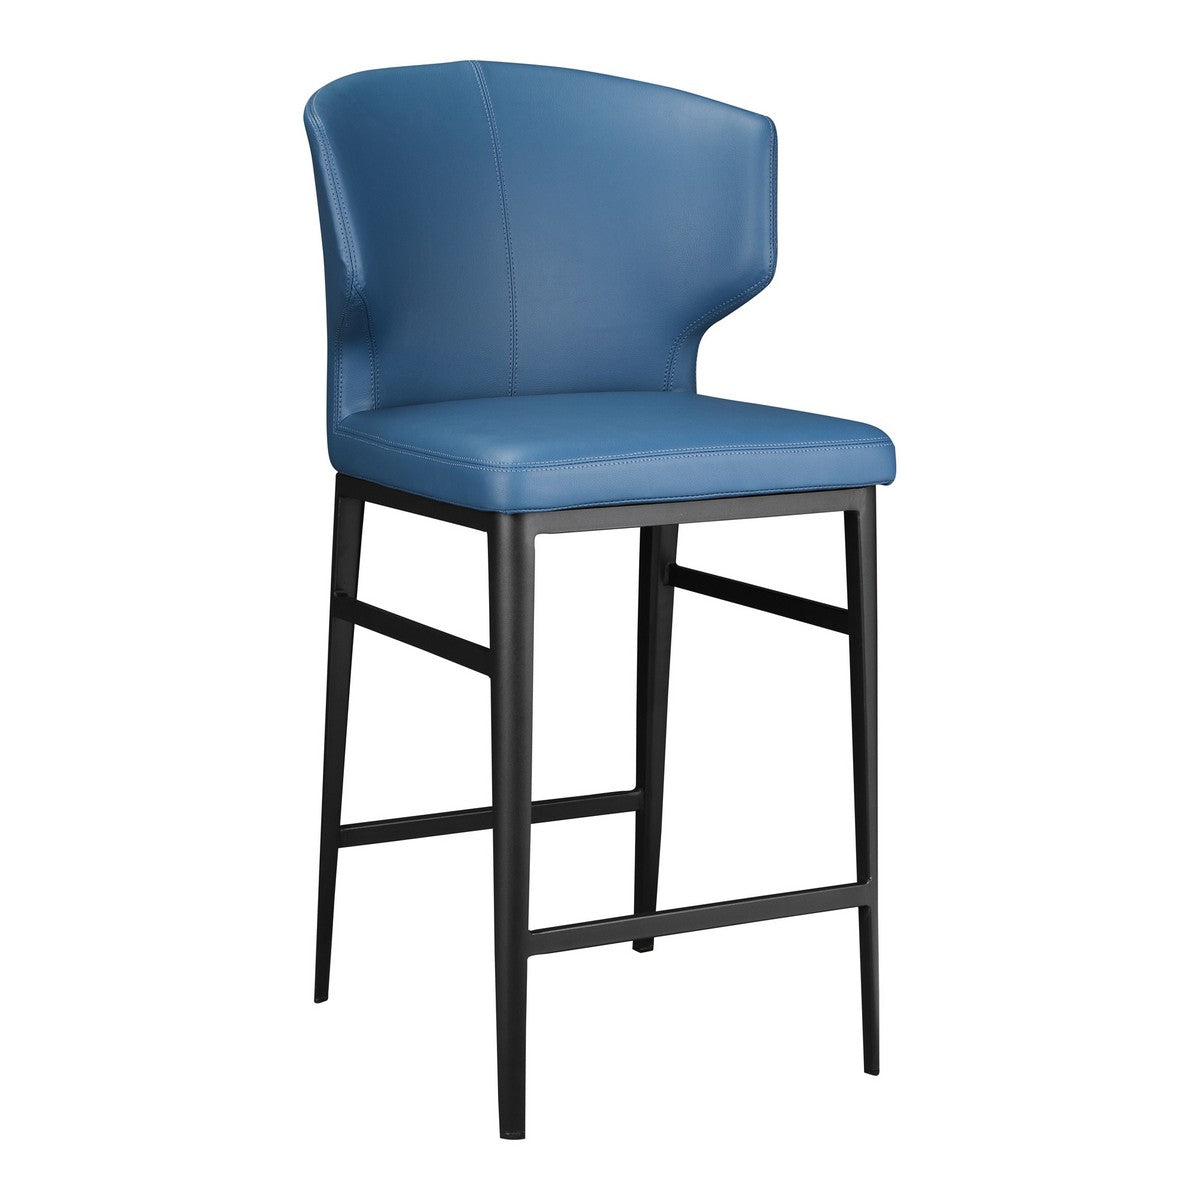 Moe's Home Collection Delaney Counter Stool Steel Blue - EJ-1022-28